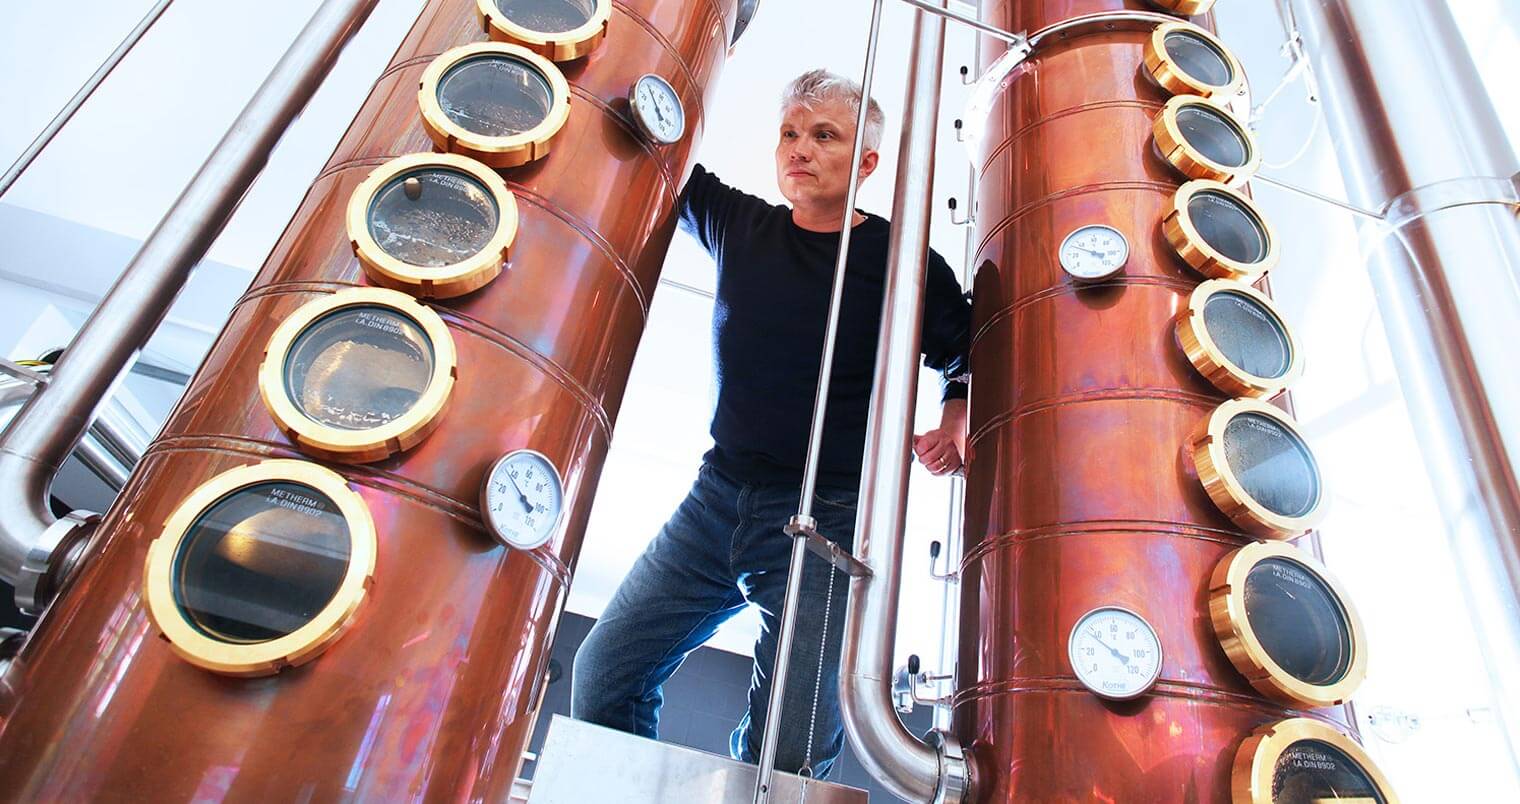 Meet Thomas Kuuttanen - Master Blender of the Year for Purity Vodka, featured image